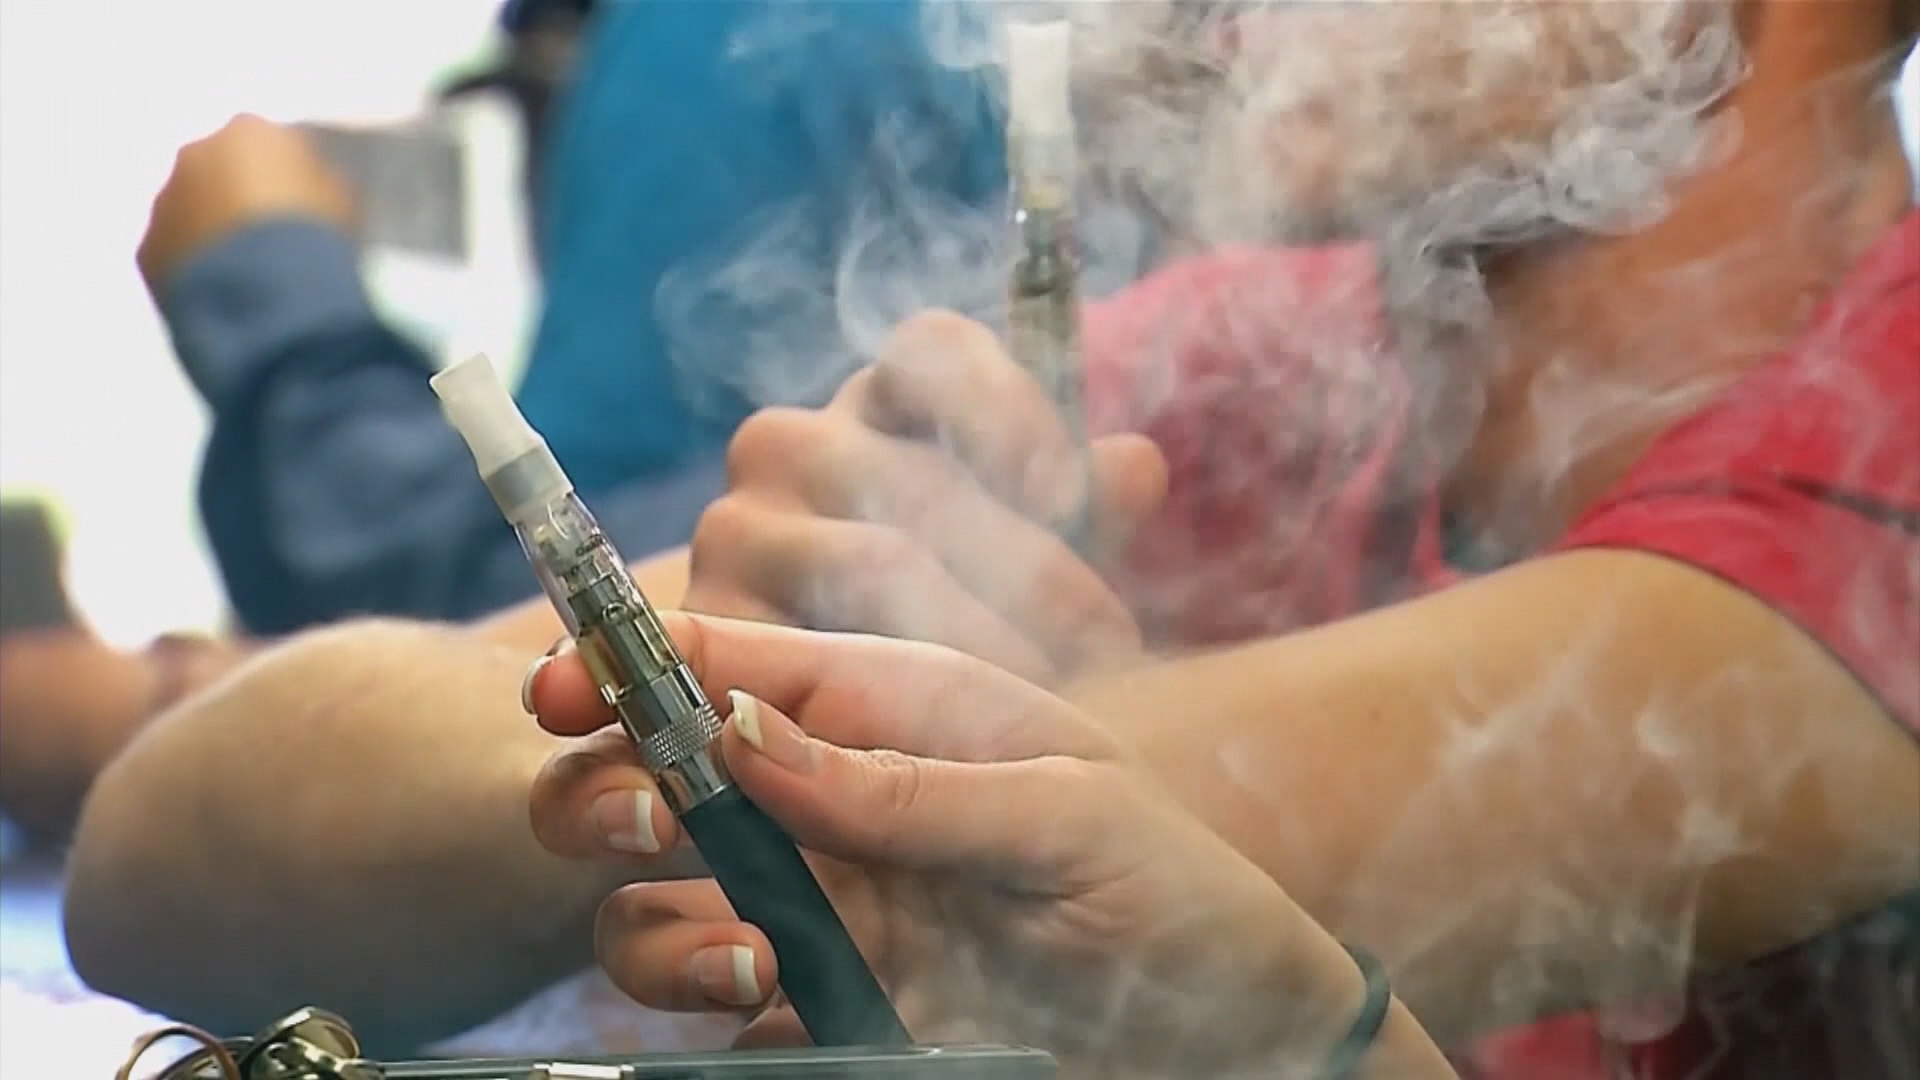 The new rules recently signed into law by President Trump raise the minimum legal age to buy tobacco, vape and e-cig products from 18 to 21